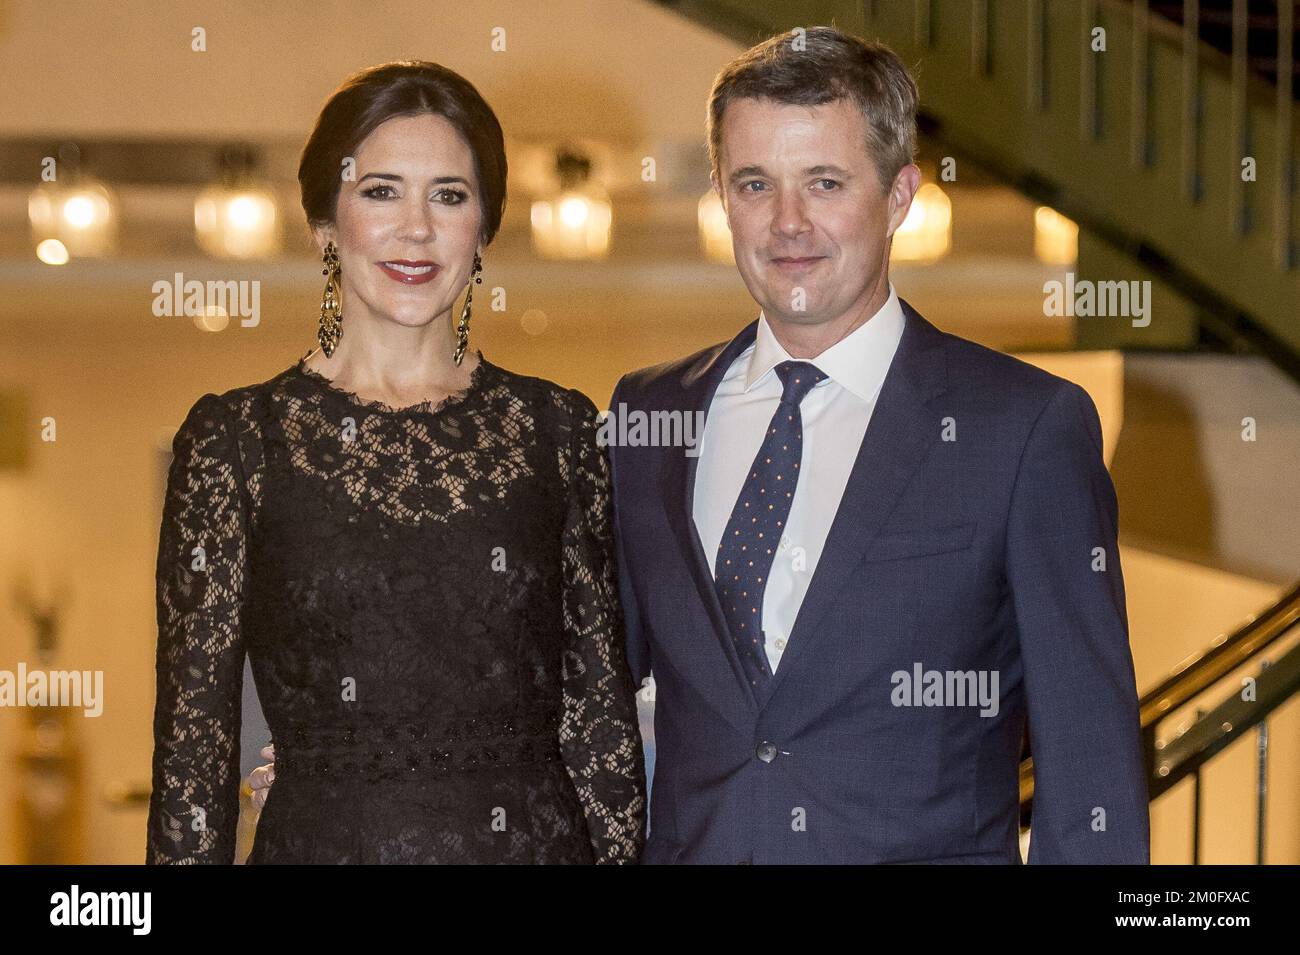 On November 7th 2018 TRH Crown Prince Frederik and Crown Princess Mary attended a grand dinner at the Waldorf Astoria in Rome. The Crown Prince Couple are part of a business delegation tour lasting from November 6th to 8th.. Stock Photo